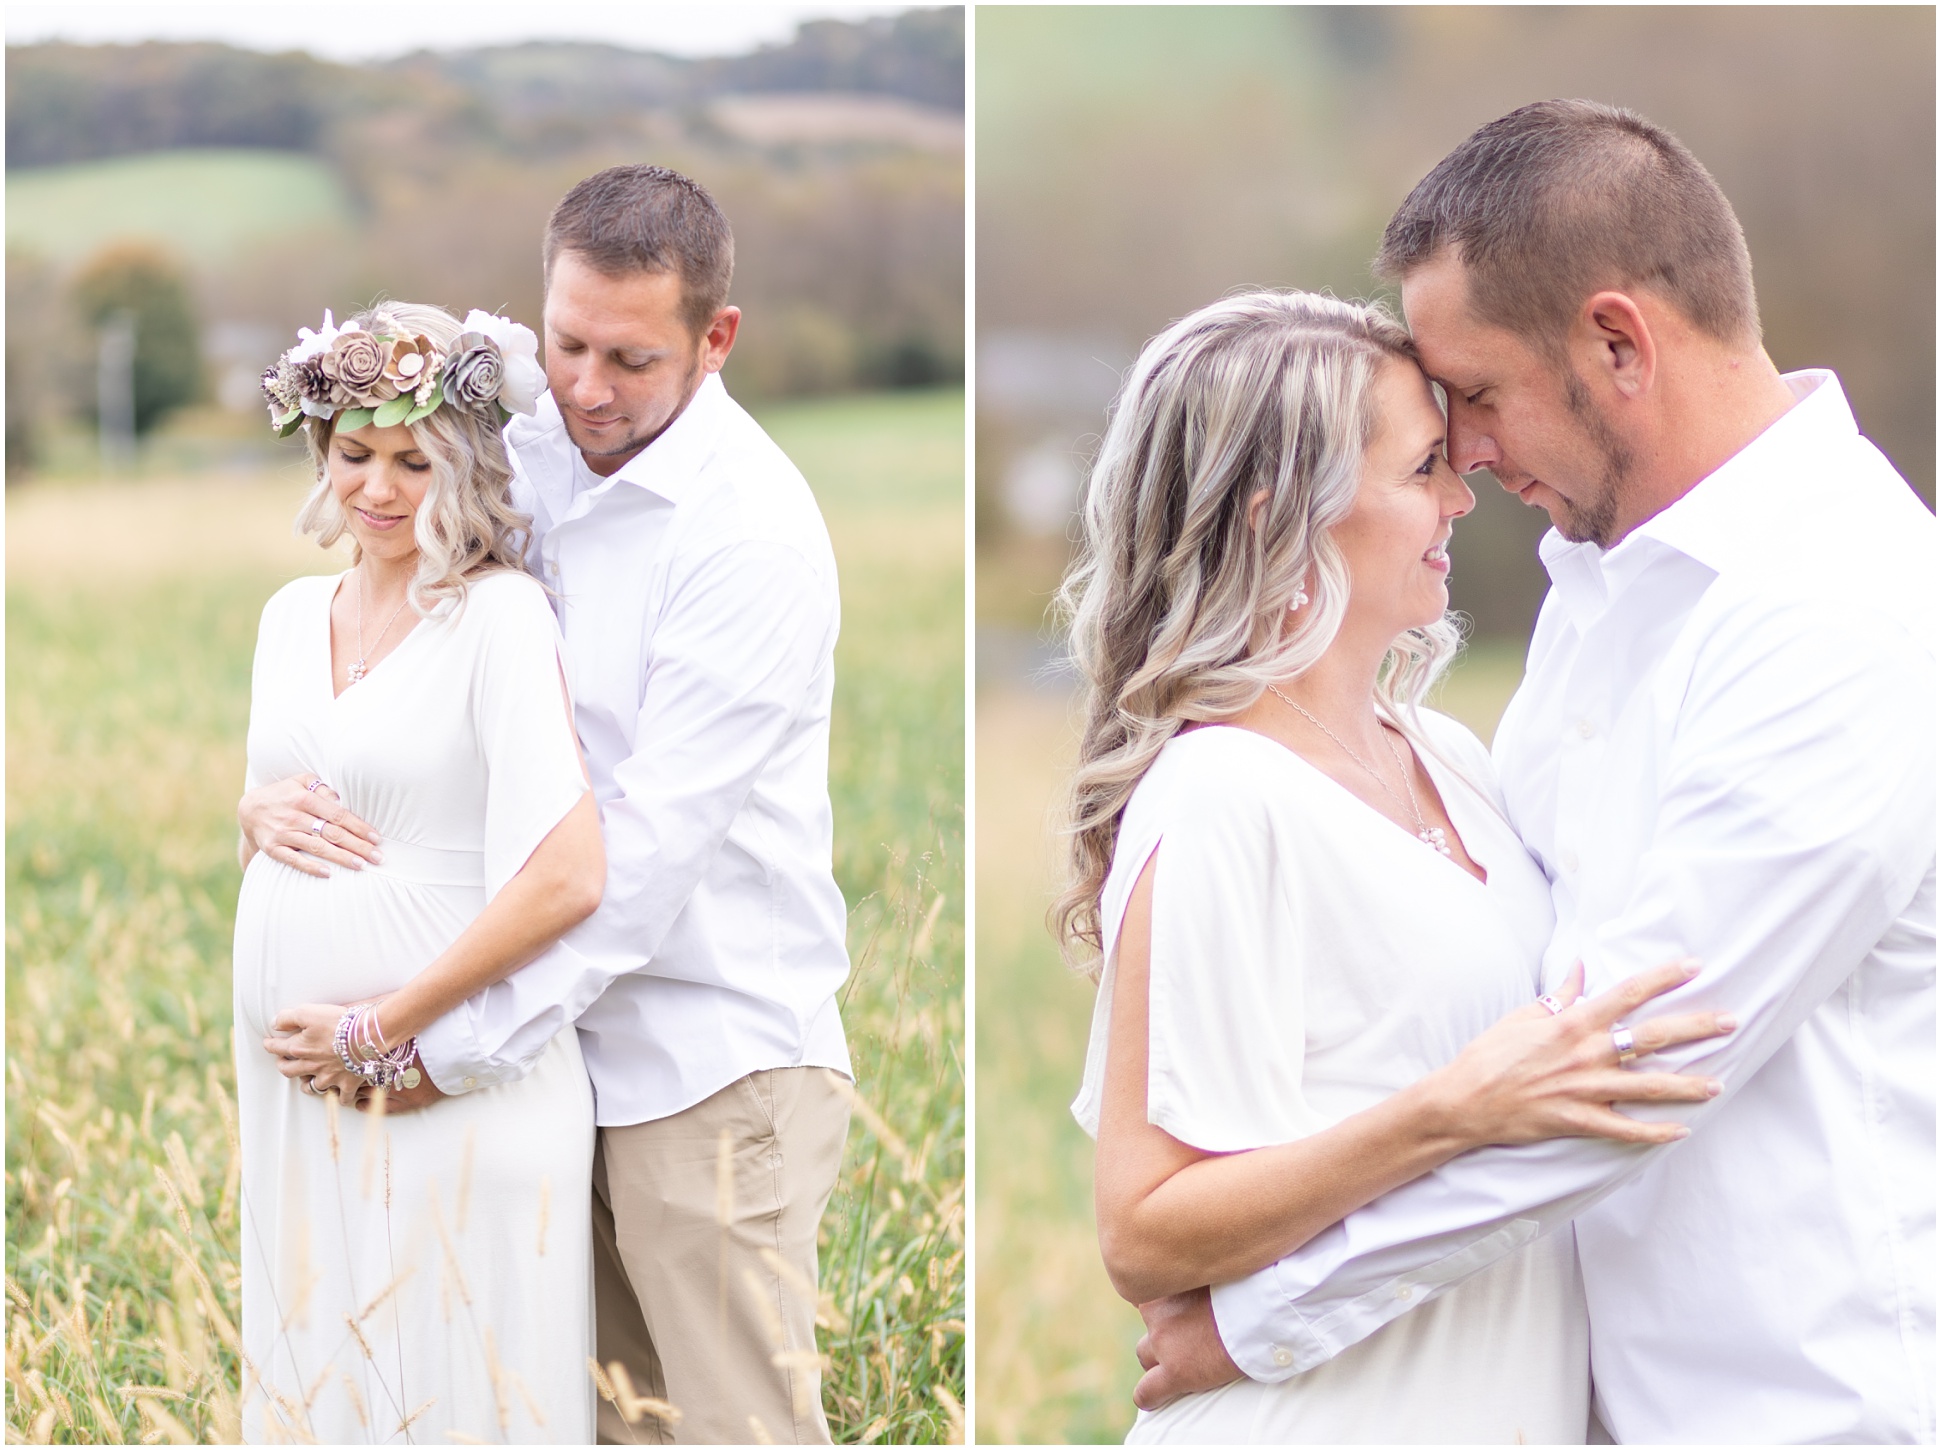 Rebecca standing in the middle of an open field for her maternity session in a white dress and a fall flower crown